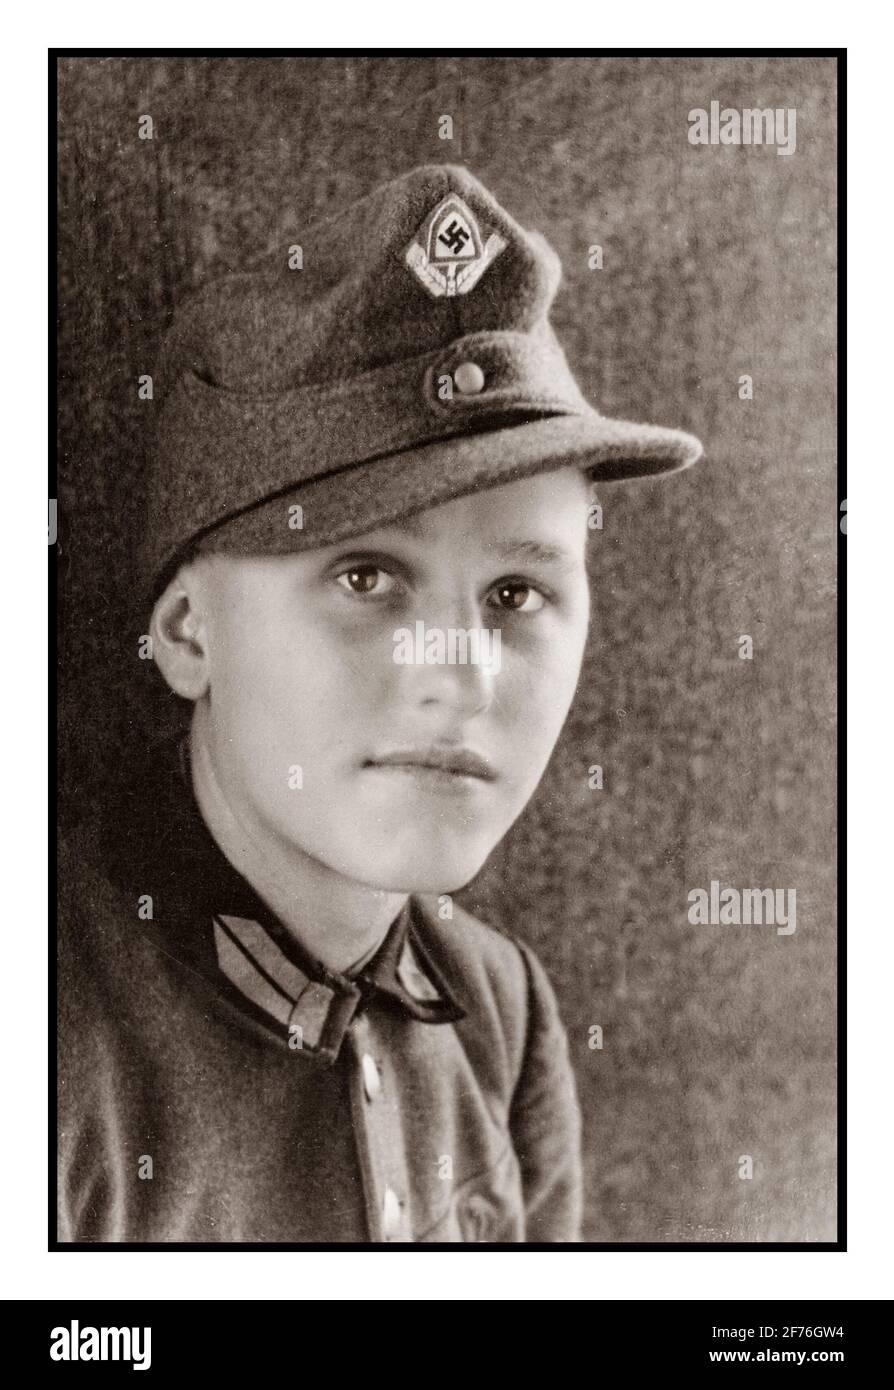 RAD NAZI GERMANY 1930’s Portrait Teenager Boy Reichsarbeitsdienst National Labour Service Uniform with cap badge displaying Swastika emblem and ears of corn with spade symbol WW2 Nazi Germany Teenager Boy Reichsarbeitsdienst volunteer labour force REICH LABOUR SERVICE Stock Photo